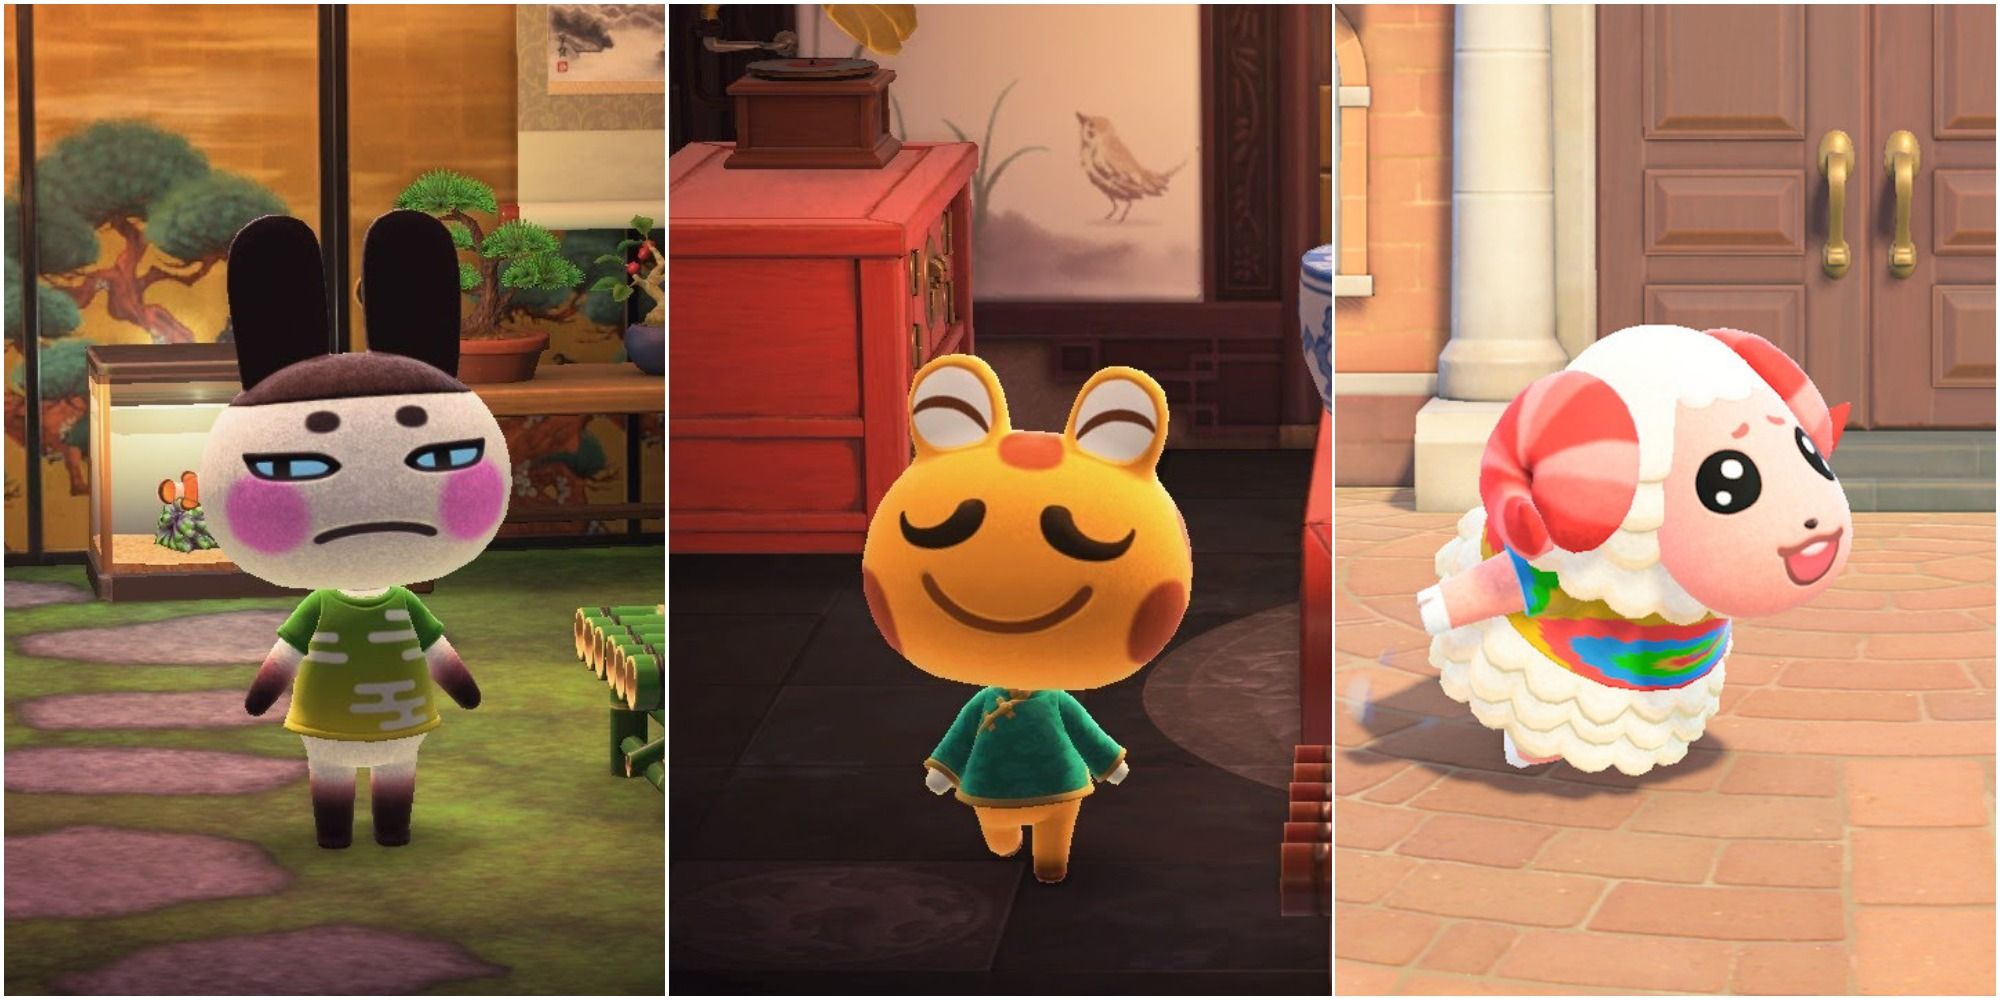 A collage of jock villagers, the white and brown rabbit Genji, the orange mustached frog Cousteau, and the expressive white and pink sheep Dom, wearing a rainbow-colored shirt.